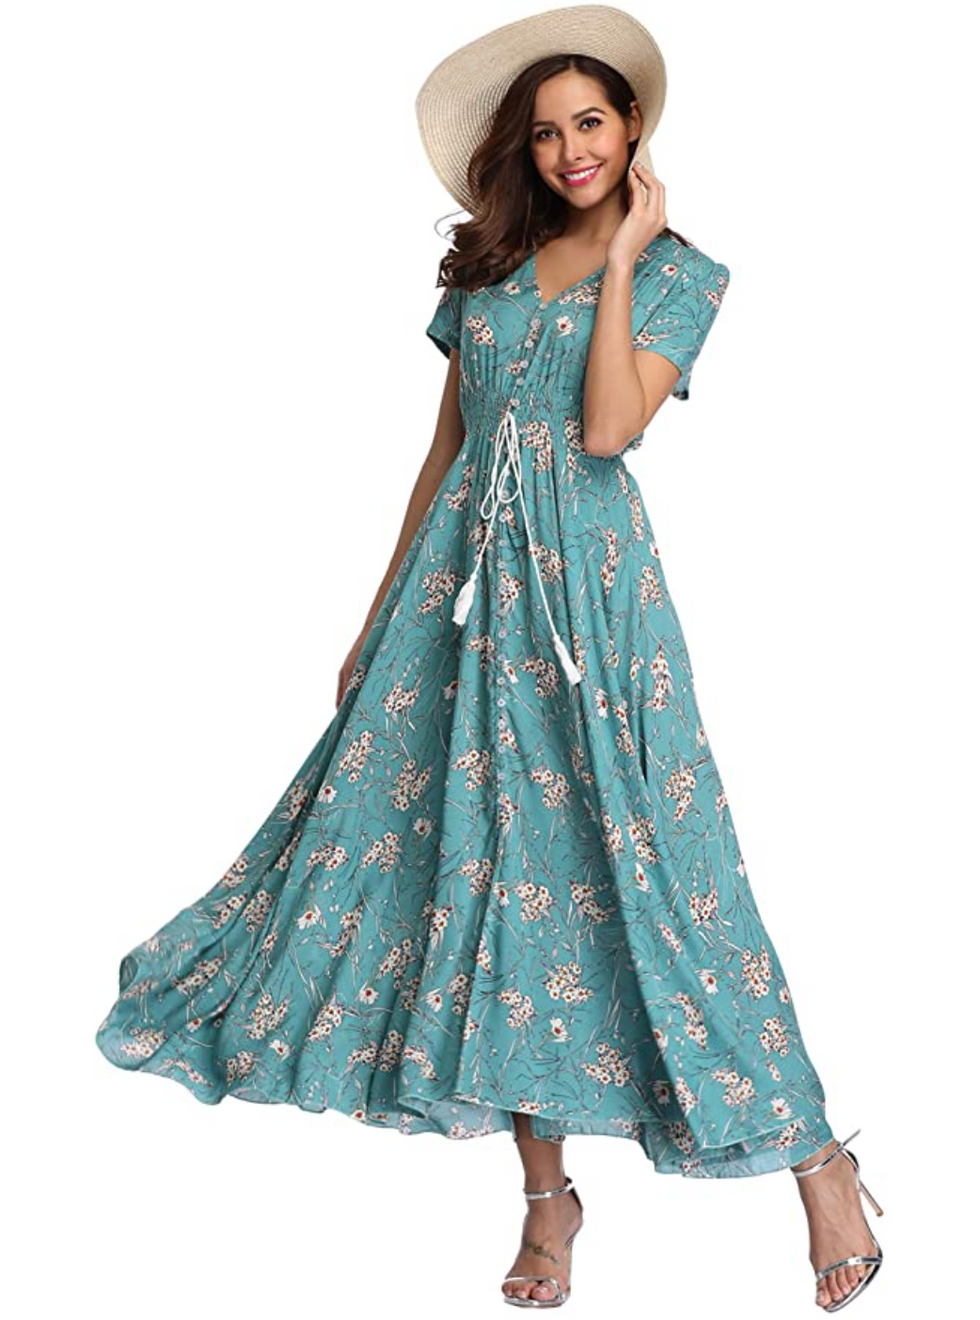 28 Easter dresses for 2021 - It's a Southern Thing